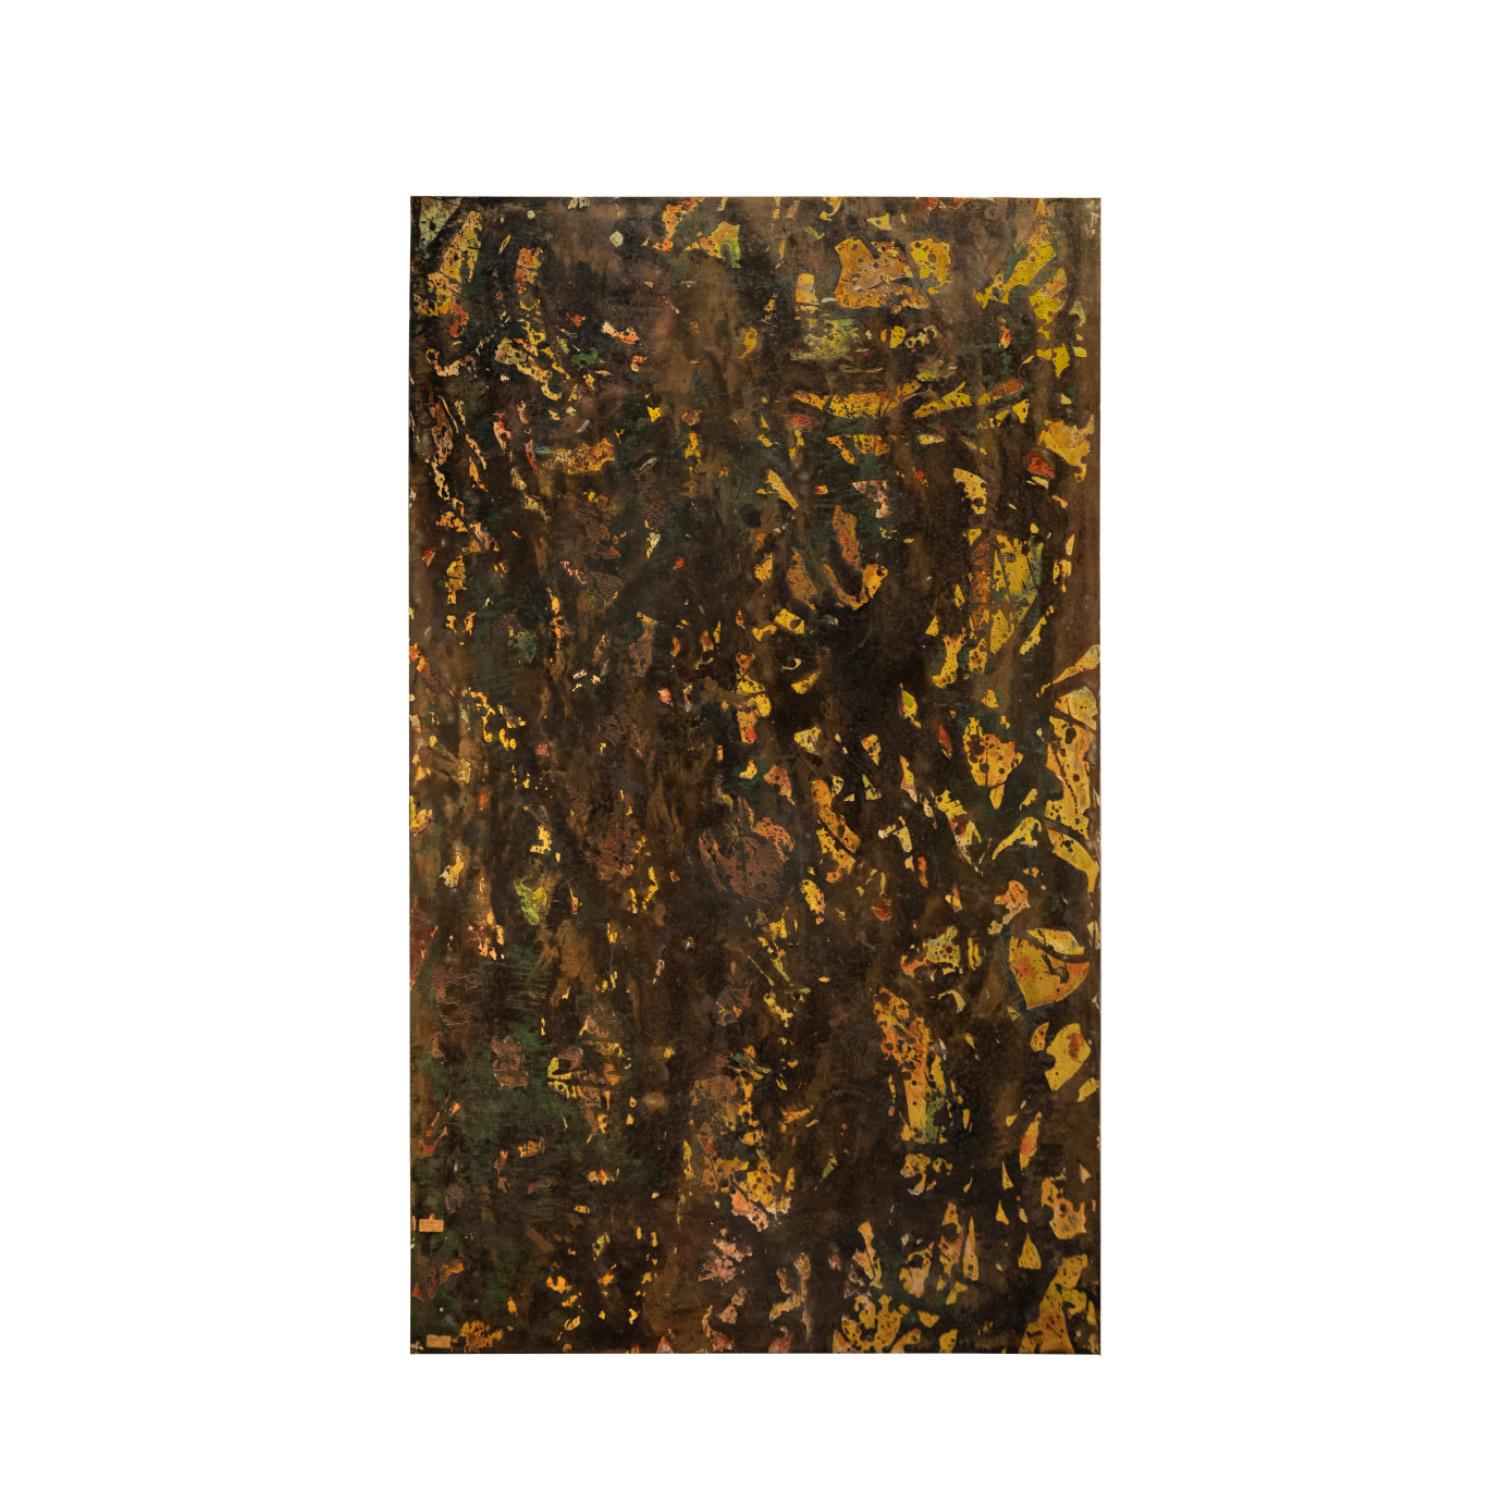 Large abstract painting “Autumn” in bronze and pewter with hand-applied colorful enamels of subtle coloration by Philip and Kelvin LaVerne, American 1960's (retains original gallery label on back). Sides are trimmed in bronze. Philip and Kelvin